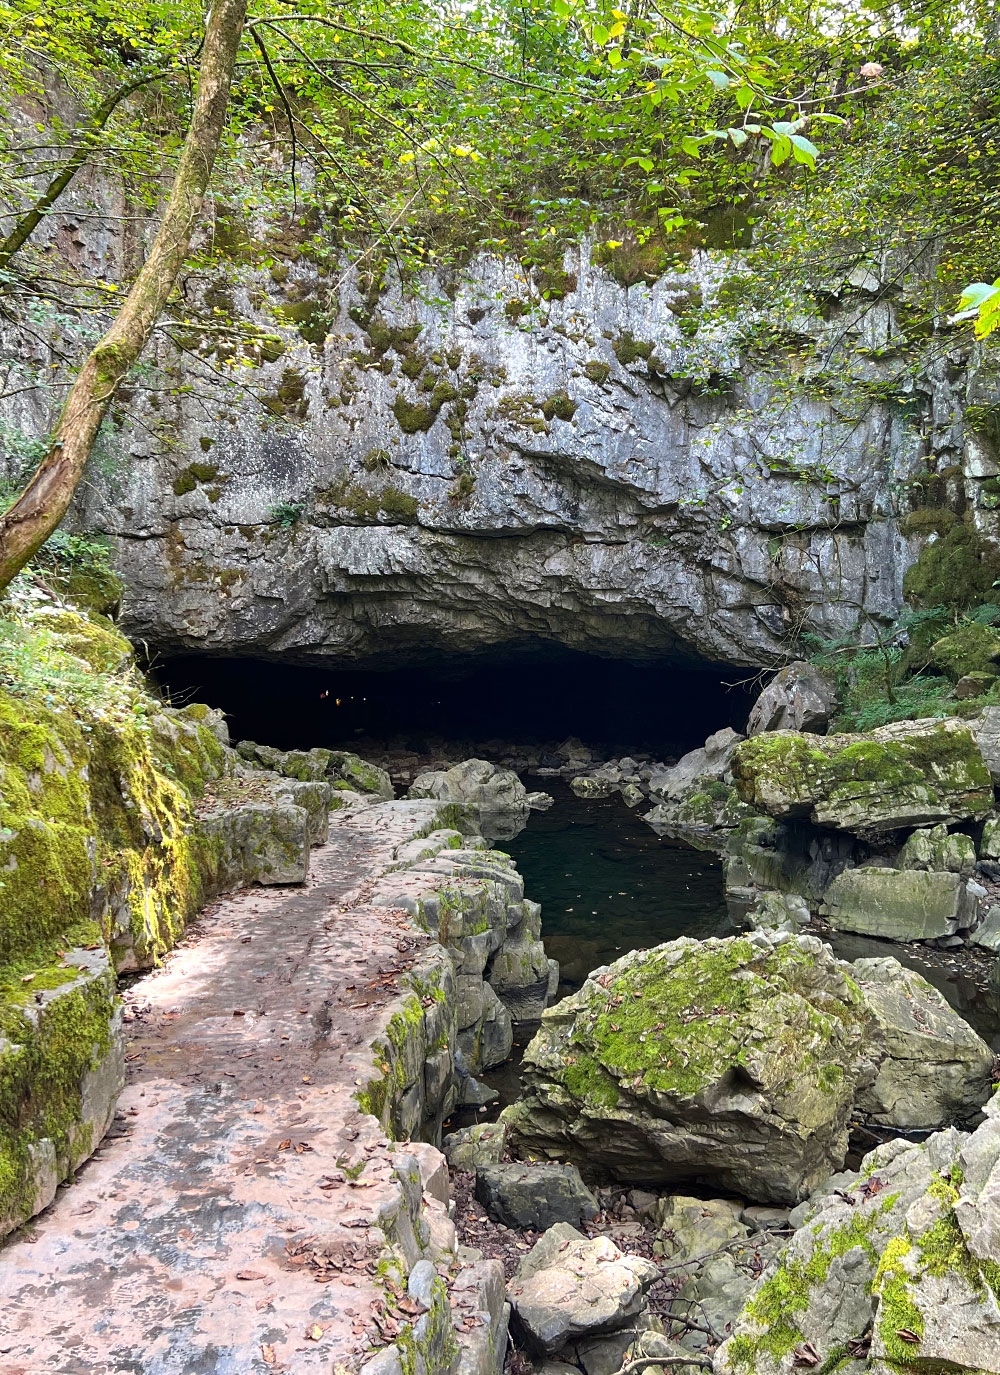 Porth yr Ogof Cave in Brecon Beacons National Park in Wales